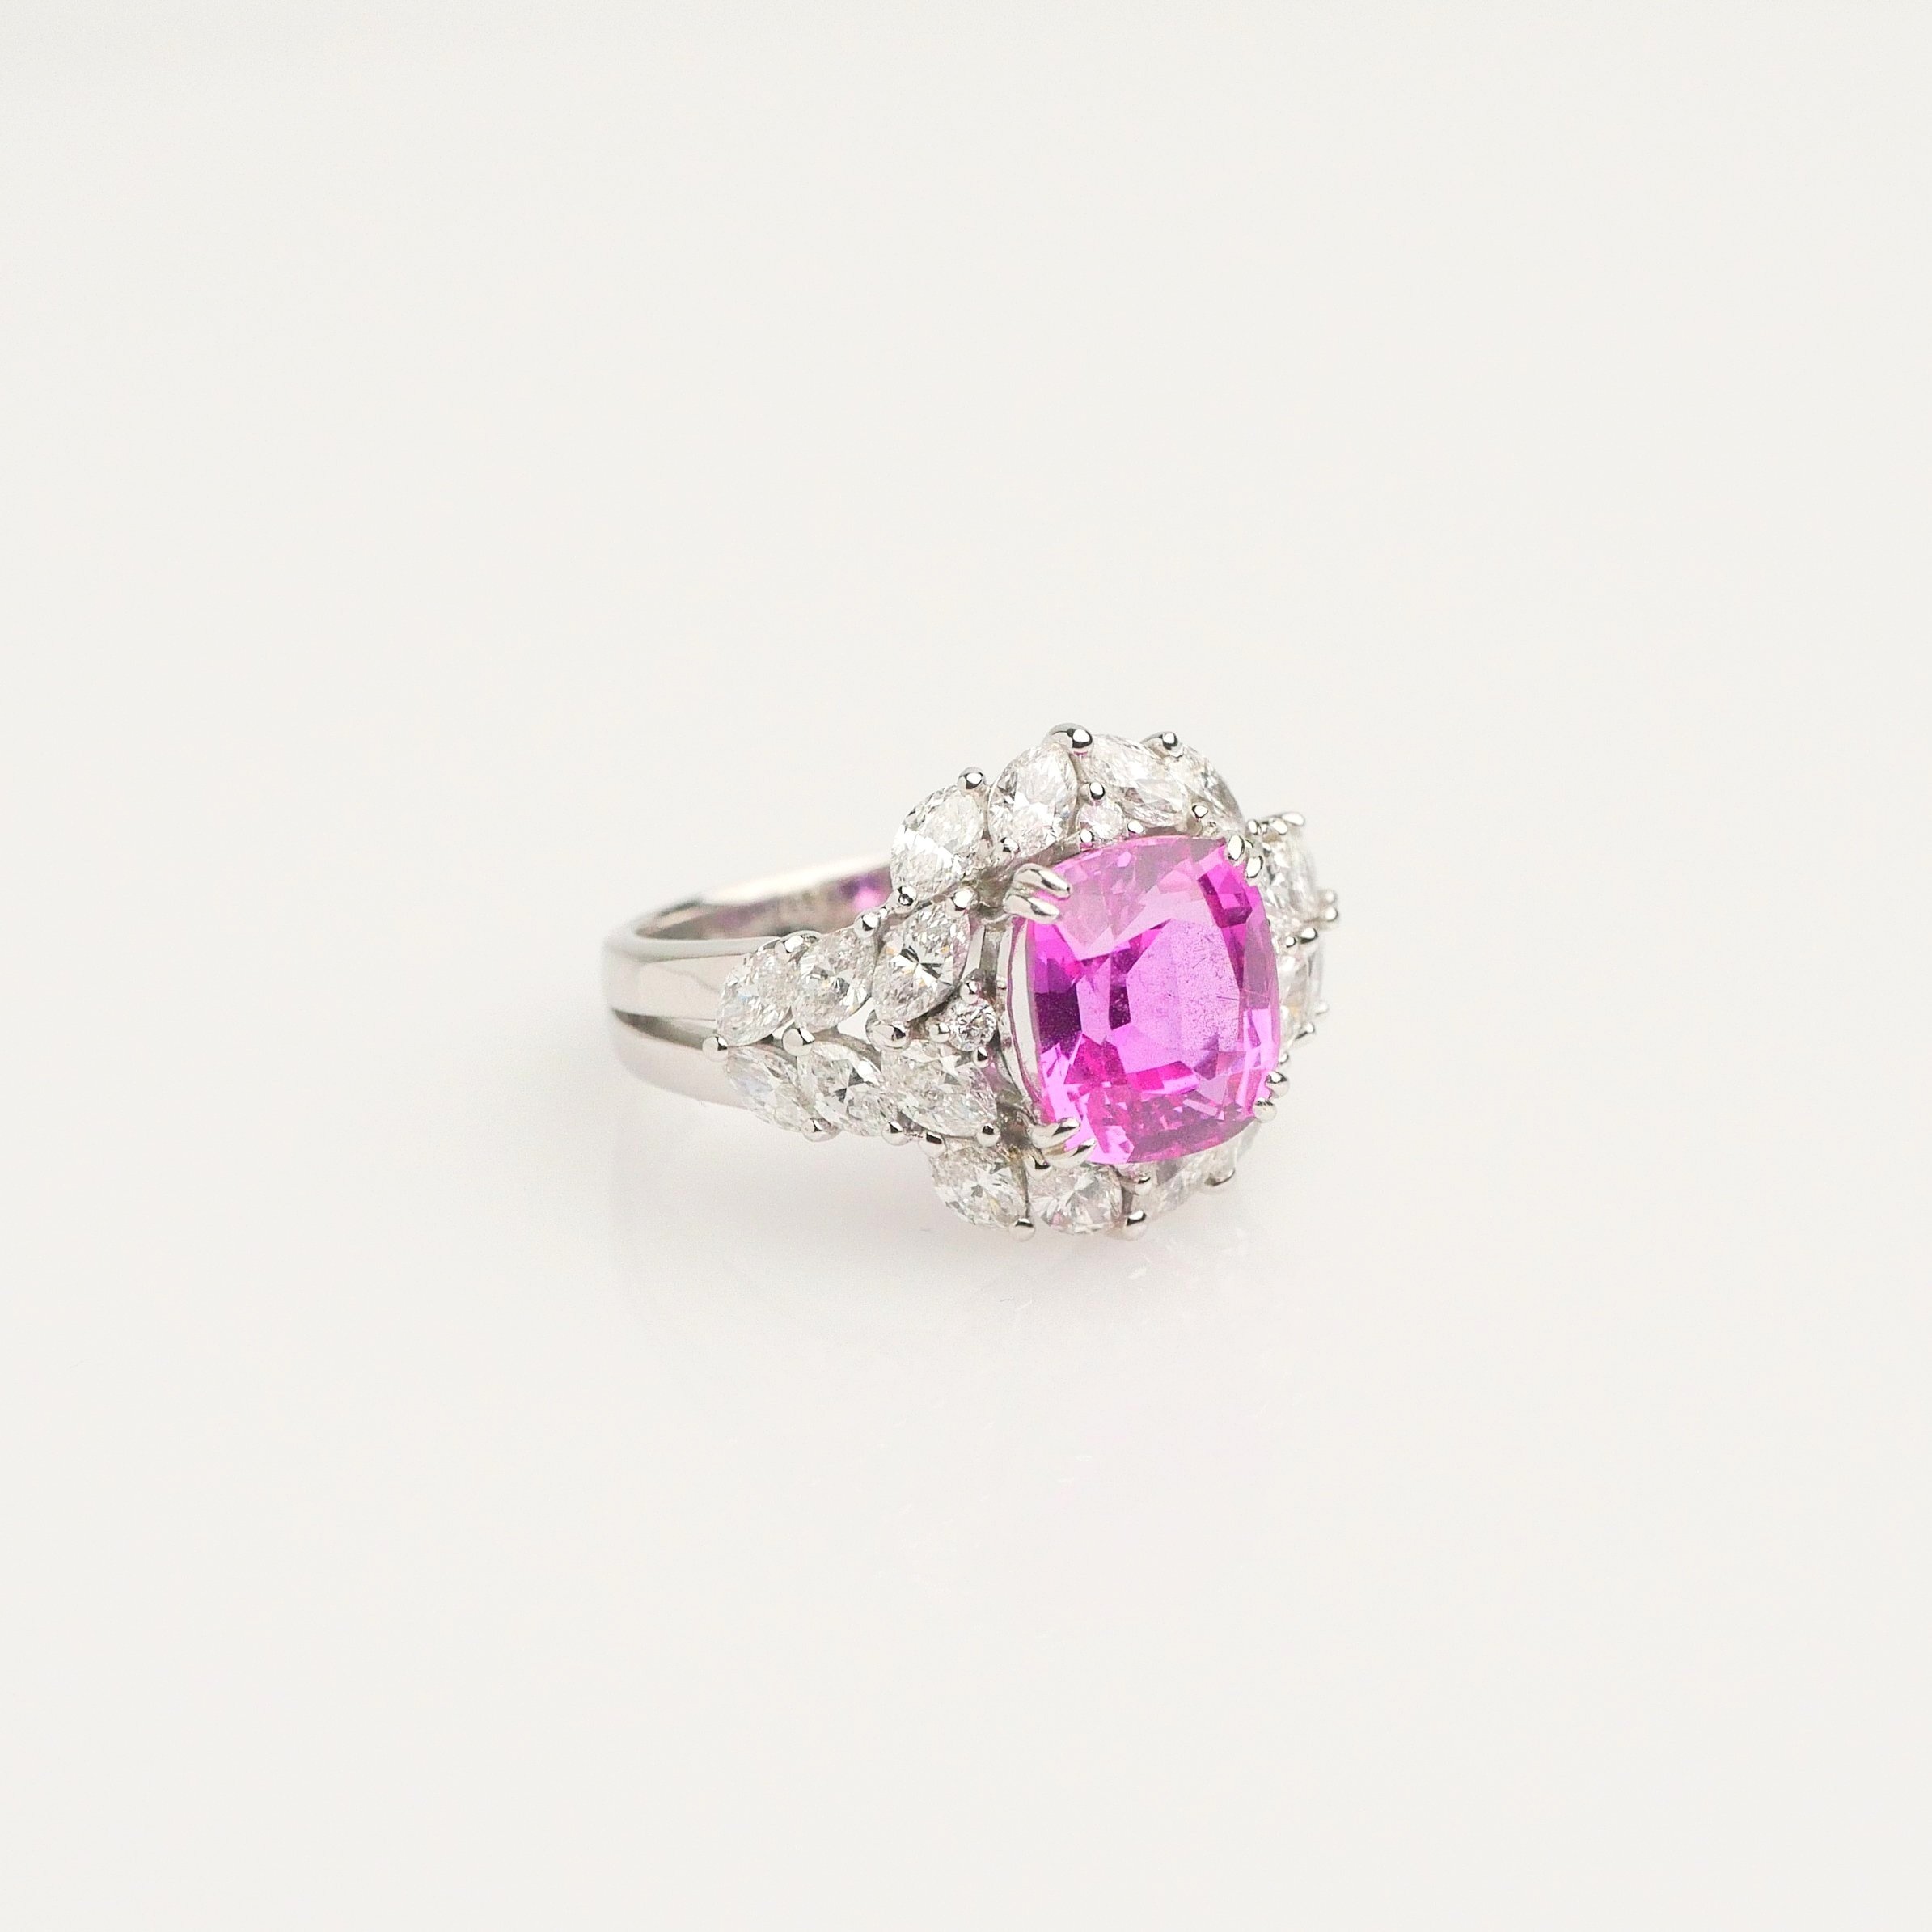  PINK SAPPHIRE AND DIAMOND RING - R0689  CUSHION SHAPED PINK SAPPHIRE 4.27 CARAT  MQ AND RB DIAMOND TOTAL WEIGHT 2.06 CARATS  PLATINUM  PLEASE CALL FOR PRICING 